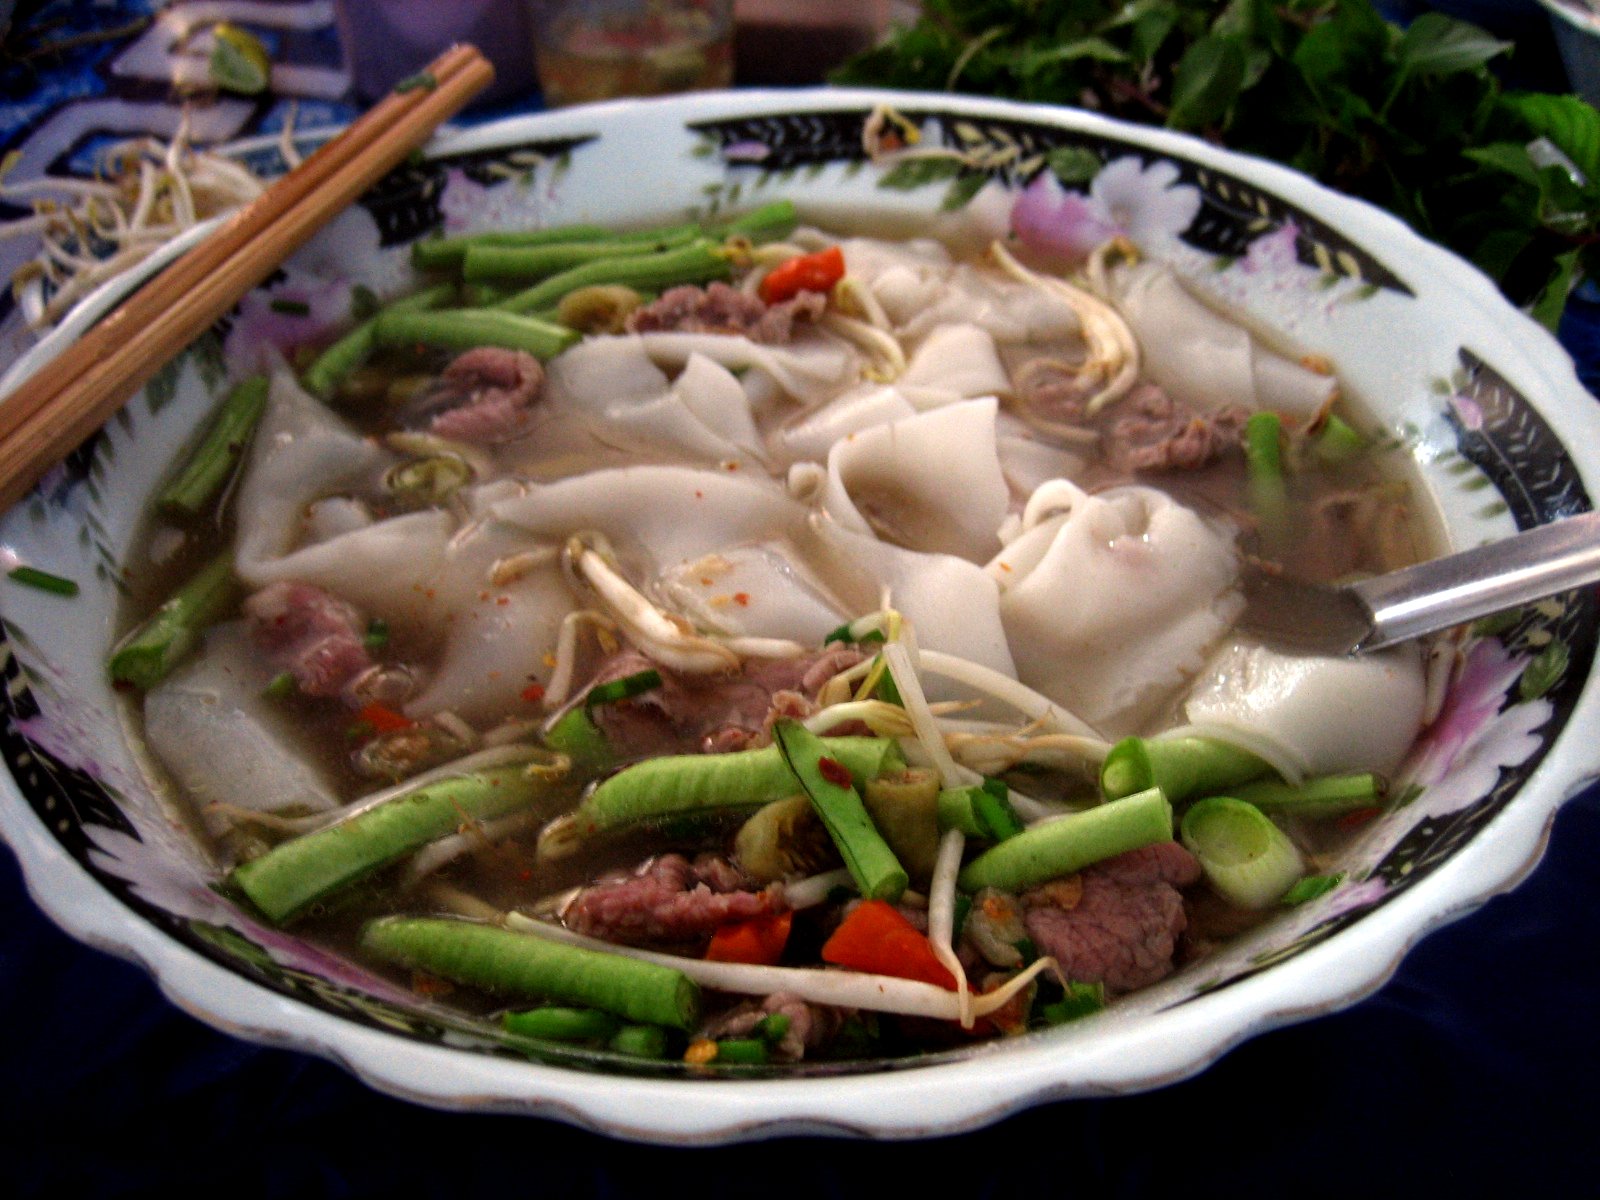 a large bowl is filled with dumplings and noodles